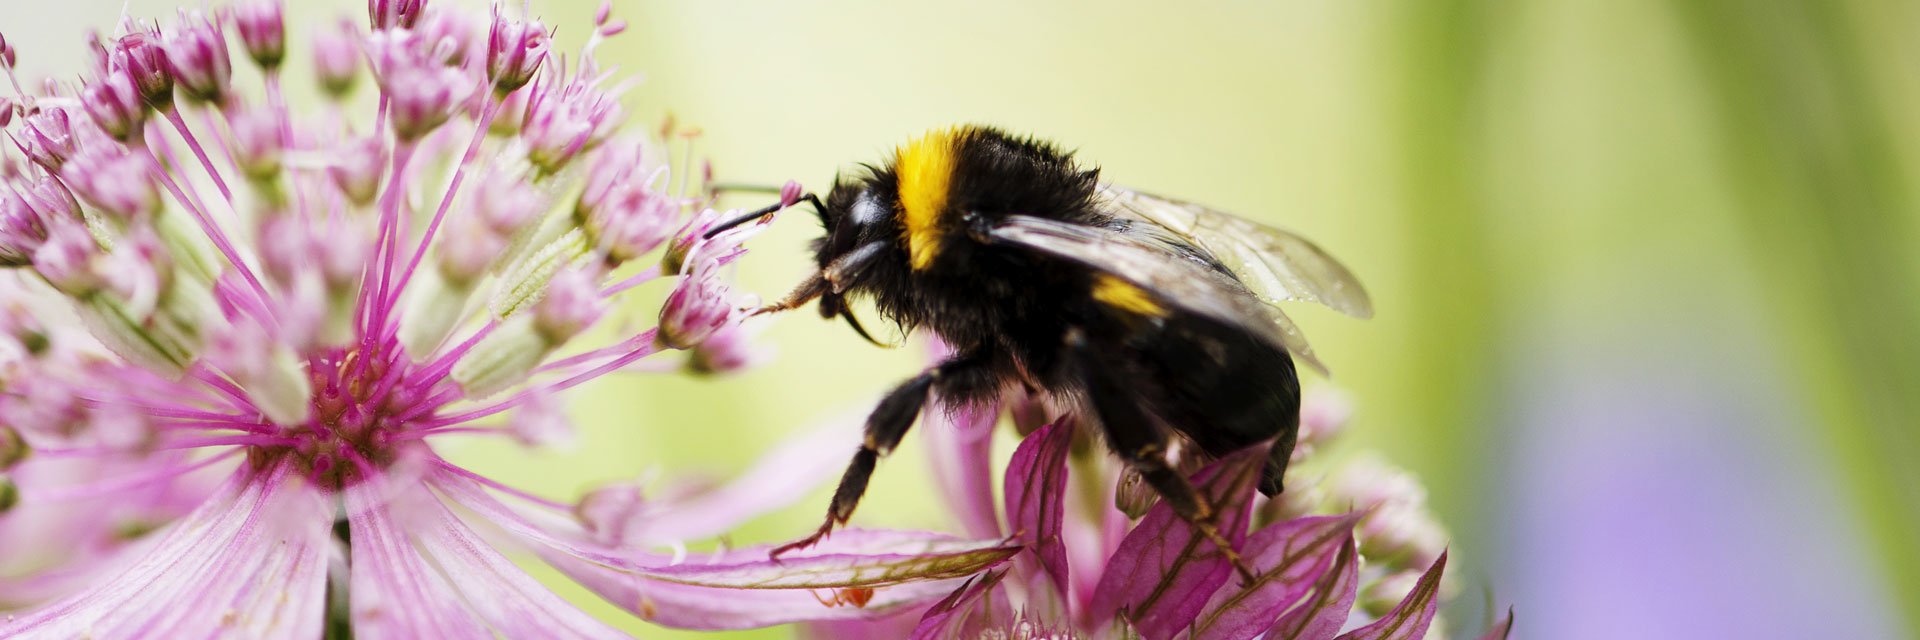 A bumblebee sits on a pink flower.